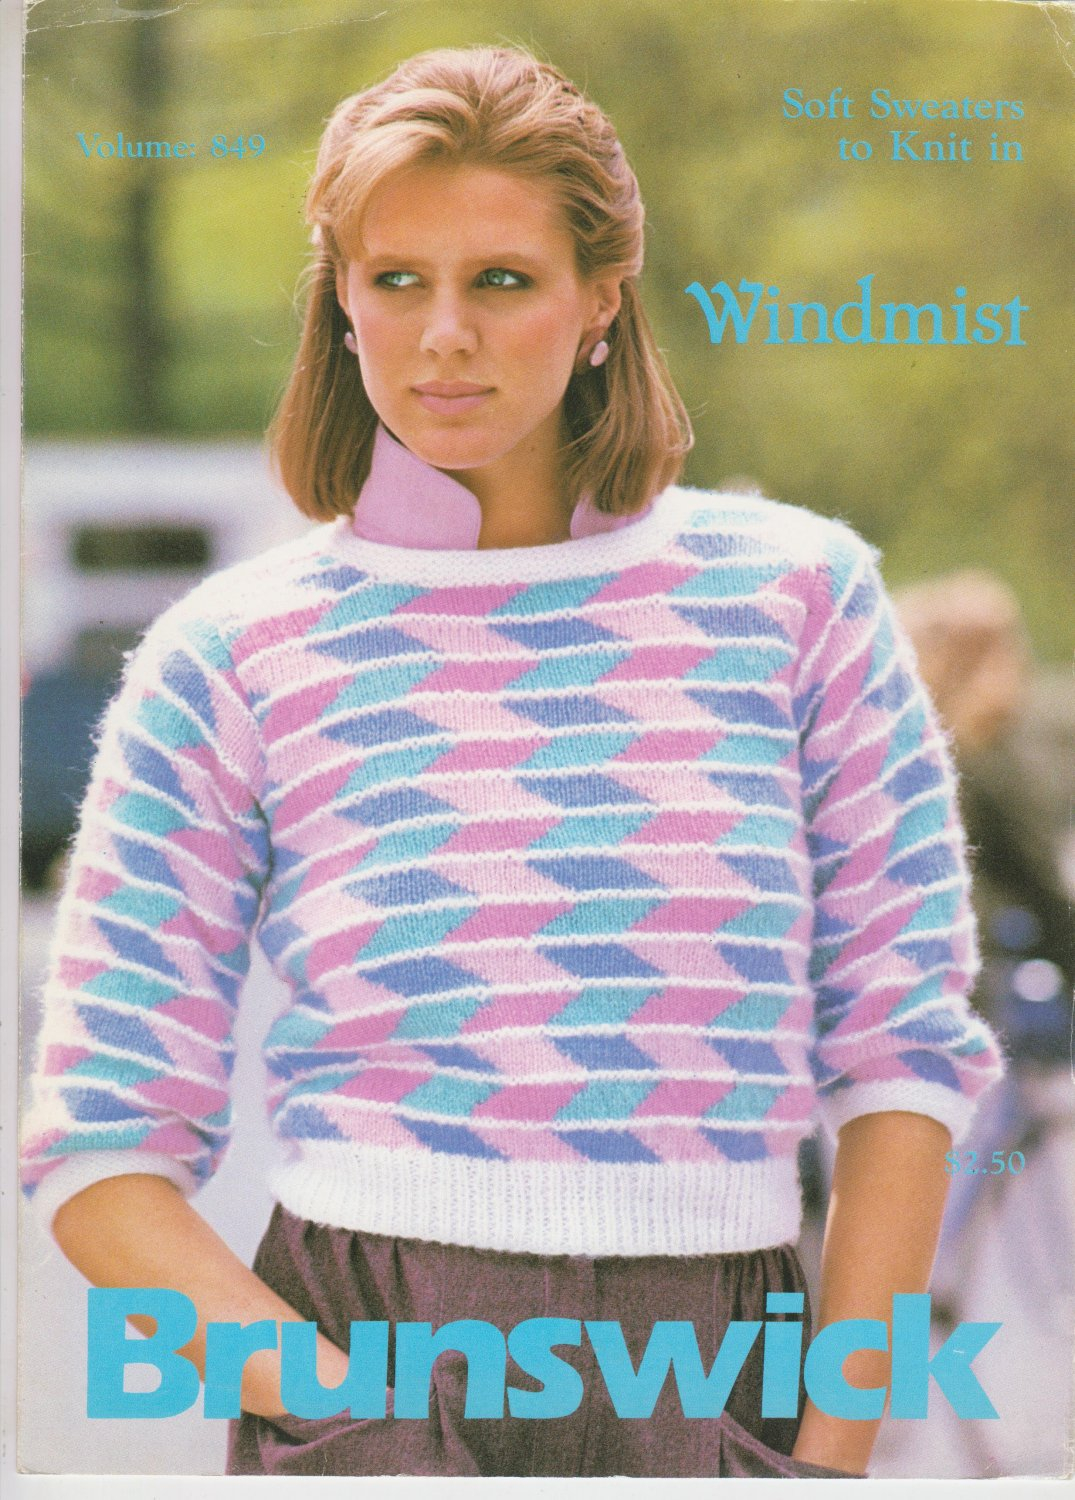 Knitted Pullover Sweater Patterns Brunswick 1983 Knitting Pattern Leaflet Volume 849 To Knit Pullover